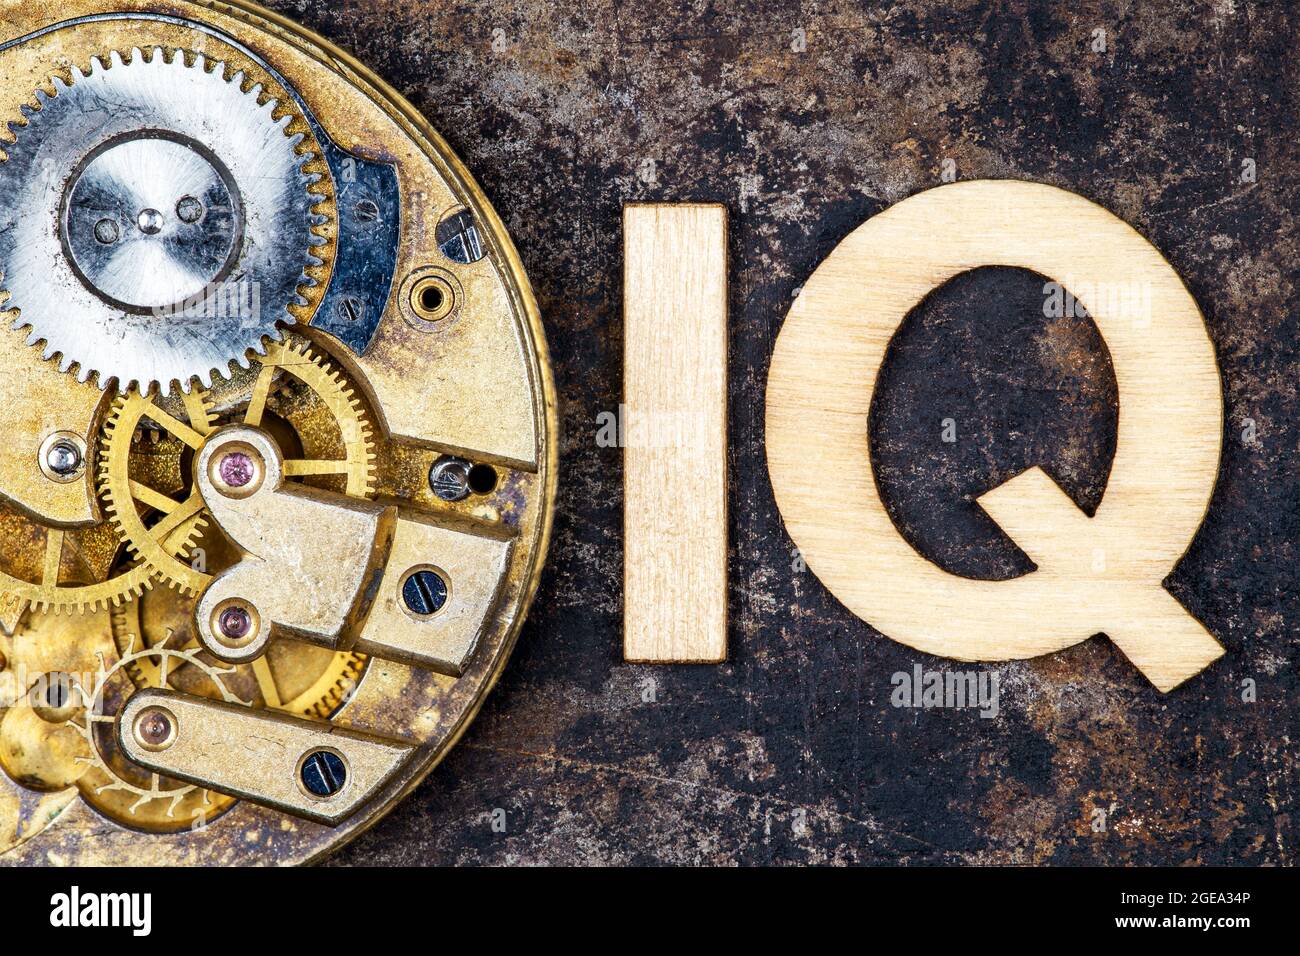 Intelligence quotient, iq test score and level concept. Antique clockwork gears with letters. Stock Photo